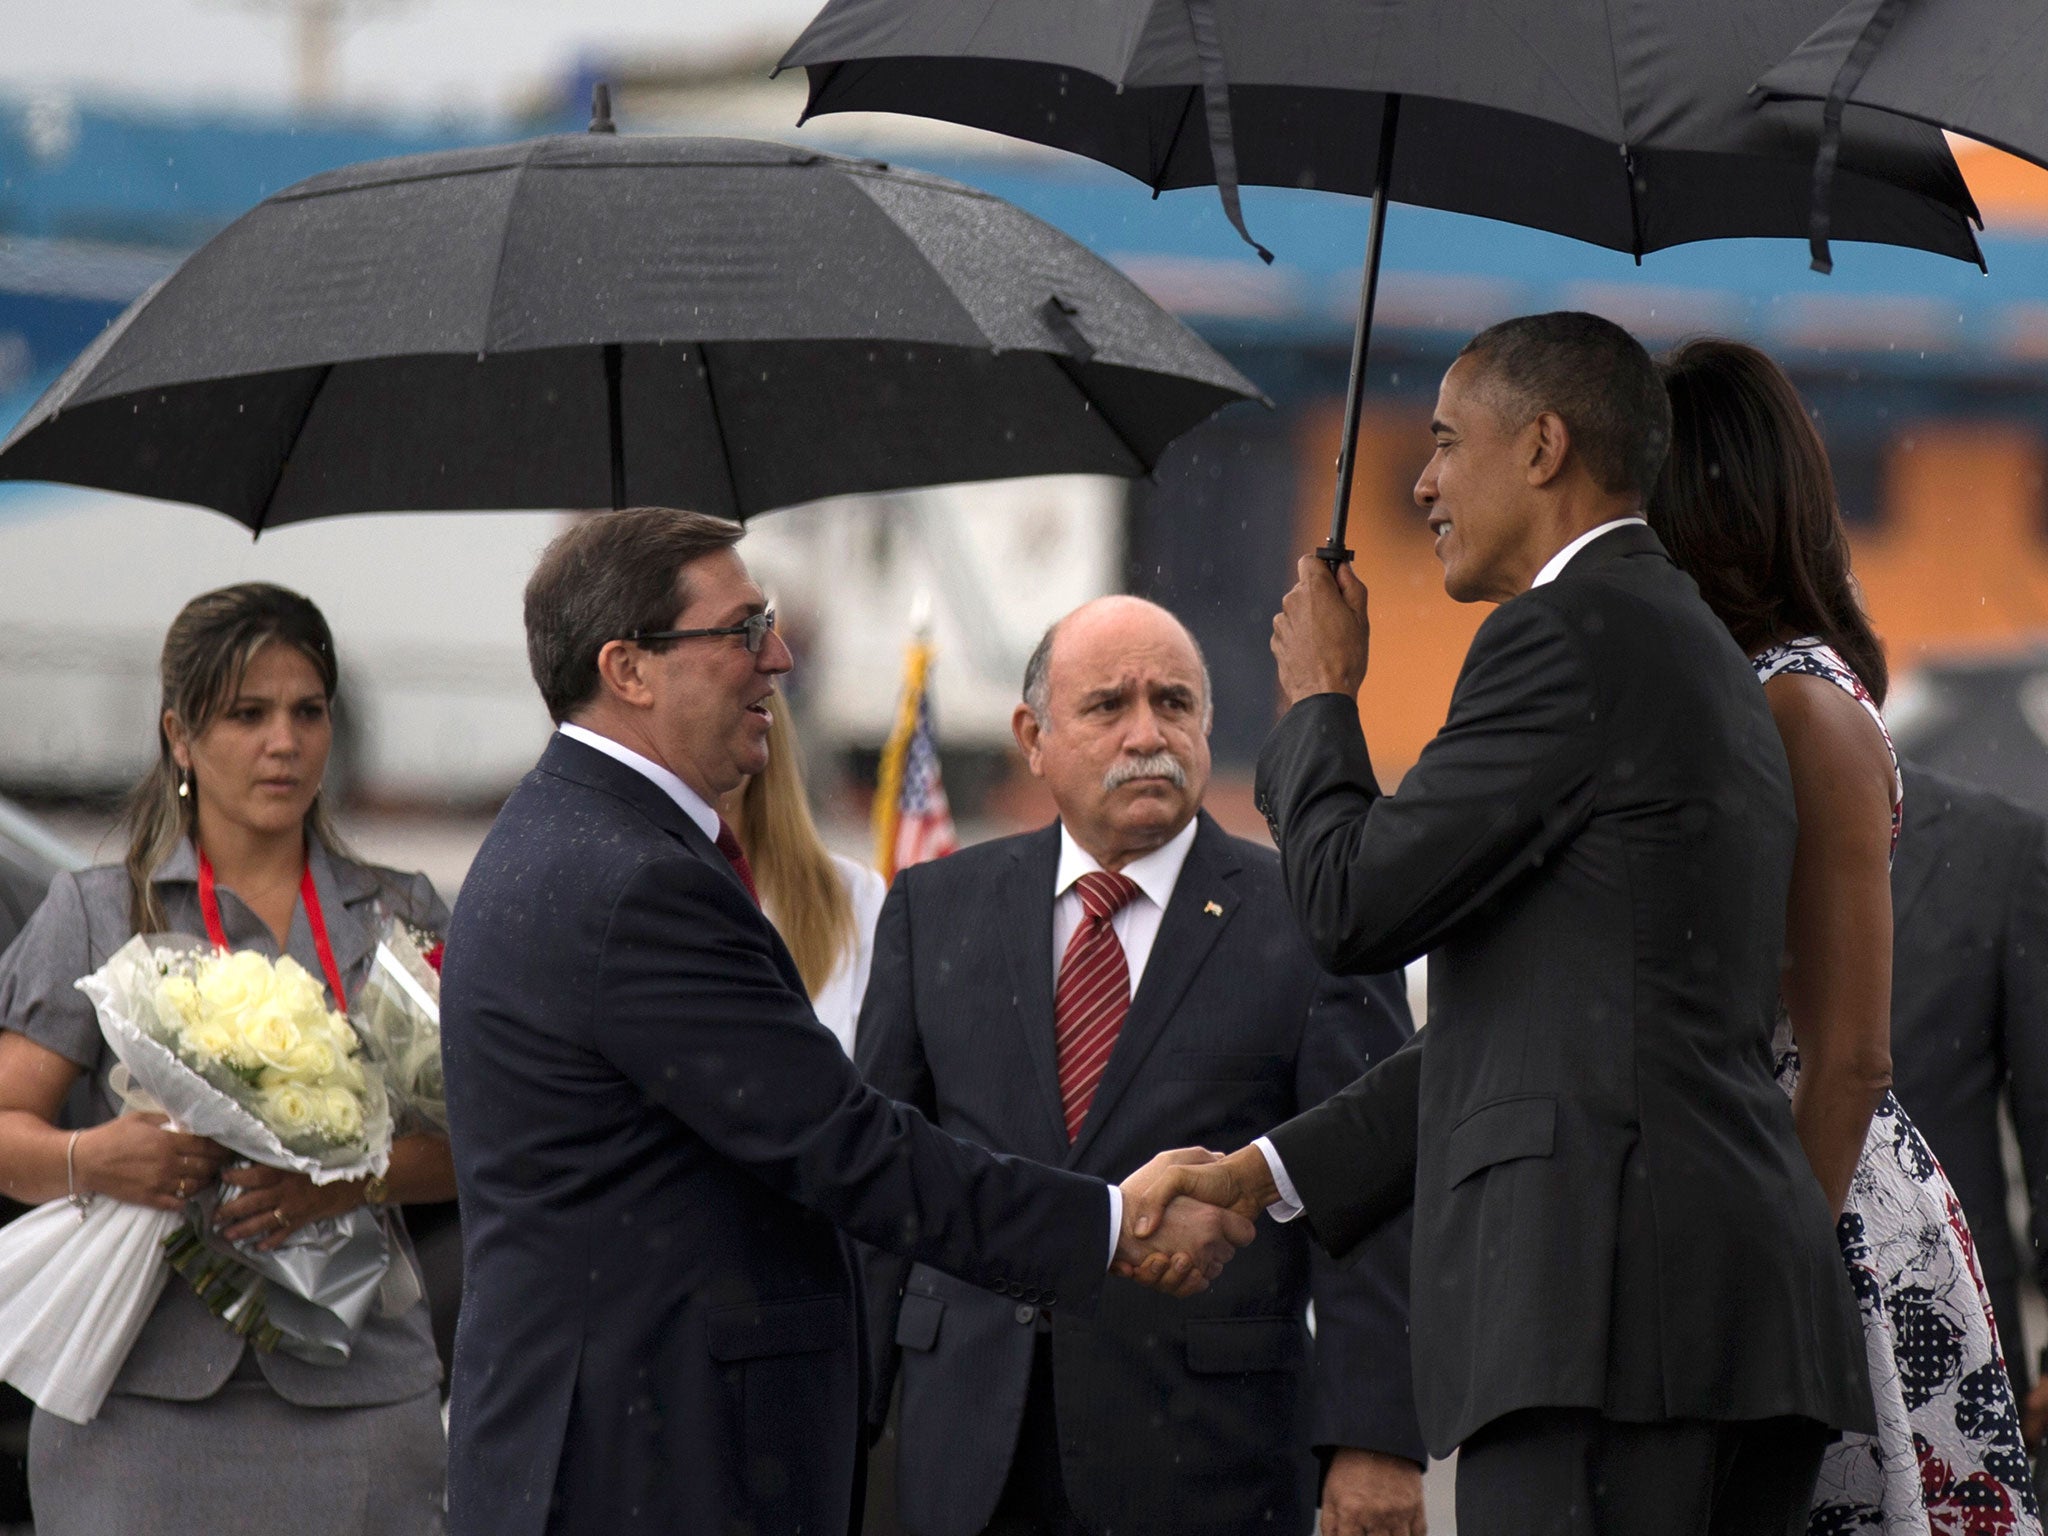 President Barack Obama shakes hands with Cuba's Foreign Minister Bruno Rodriguez upon arrival to the airport in Havana, Cuba